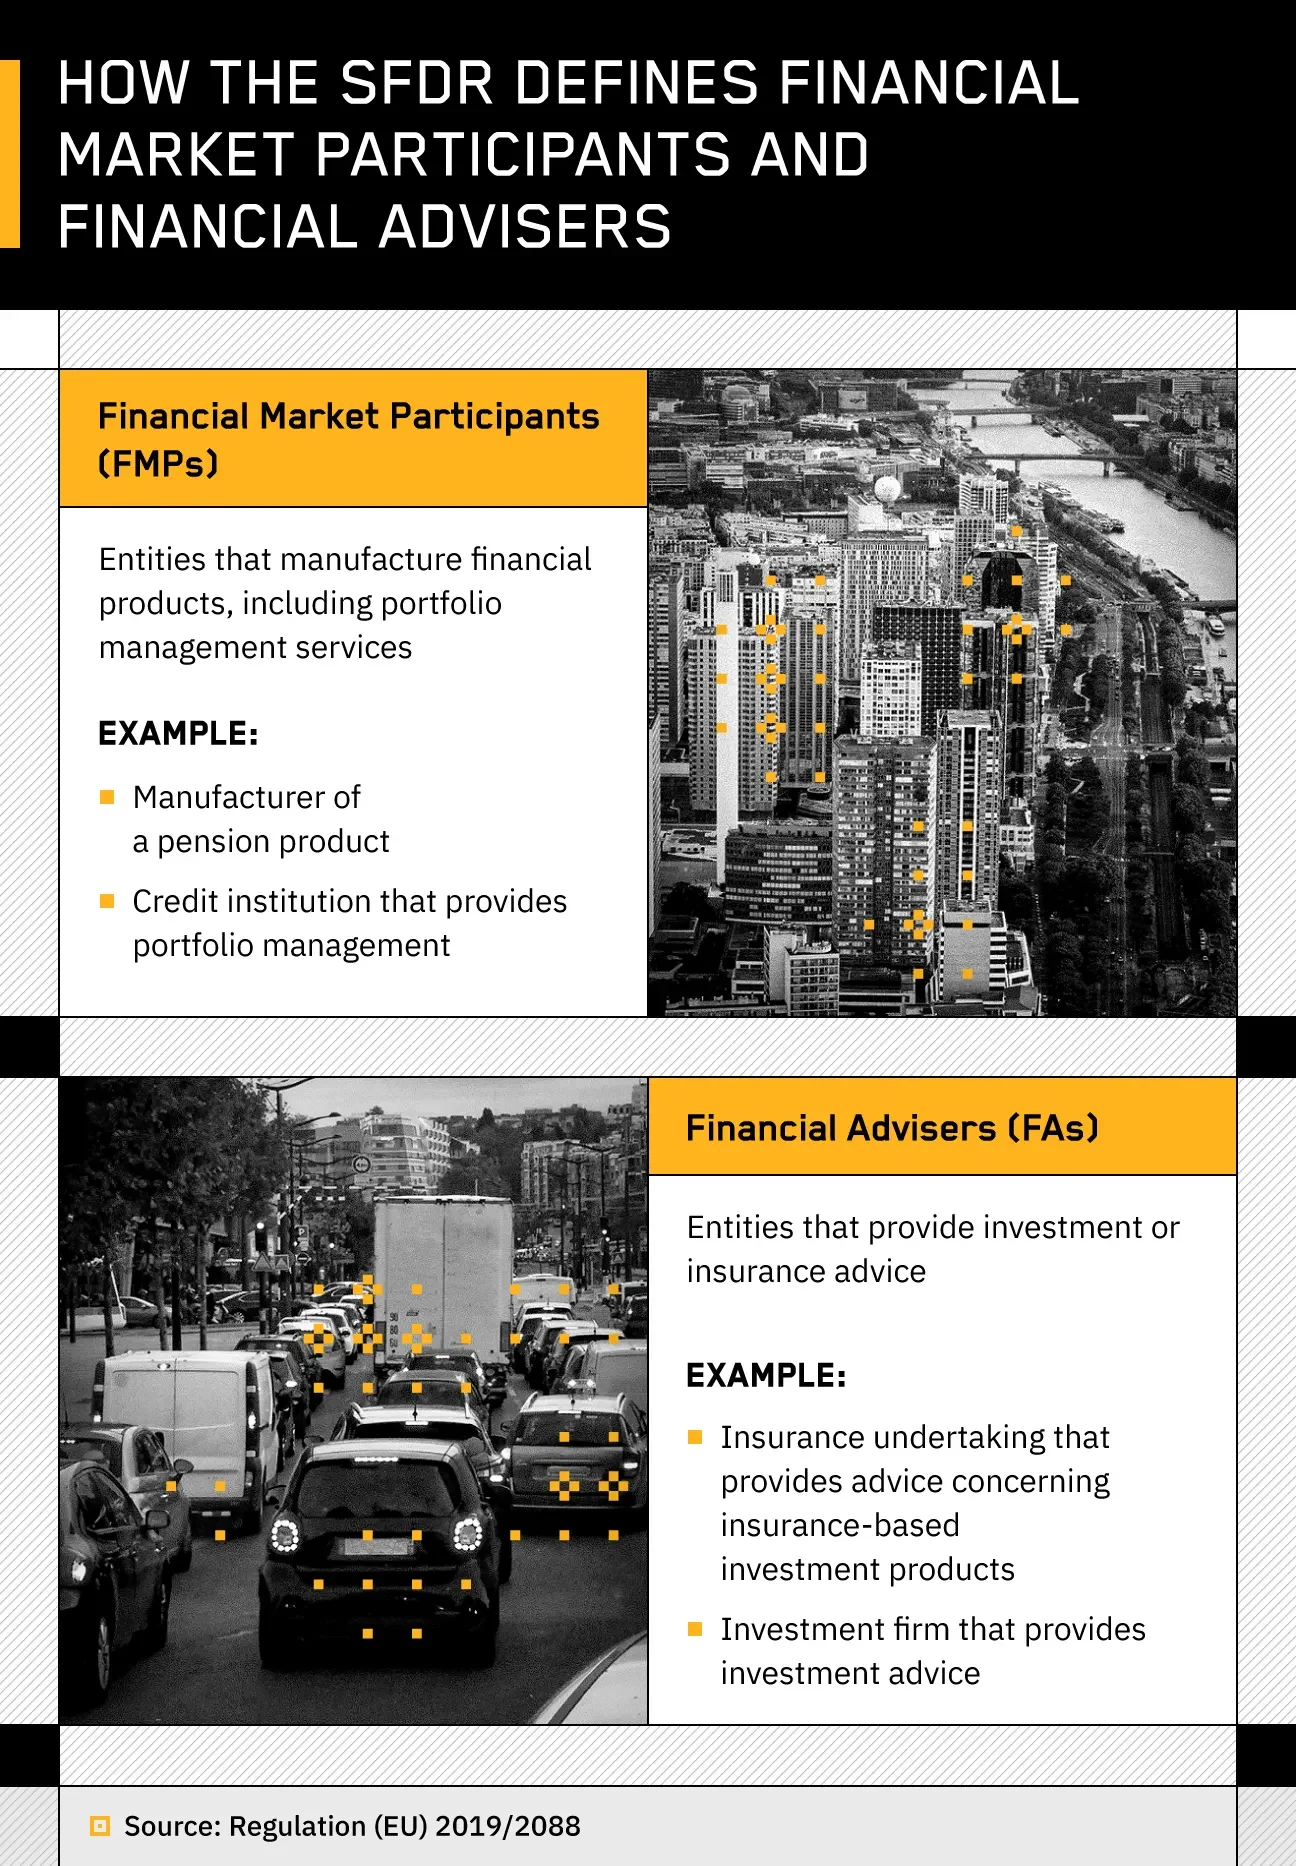 text explaining differences between financial market participants and financial advisers according to the EU’s SFDR and black and white photos of city scenery